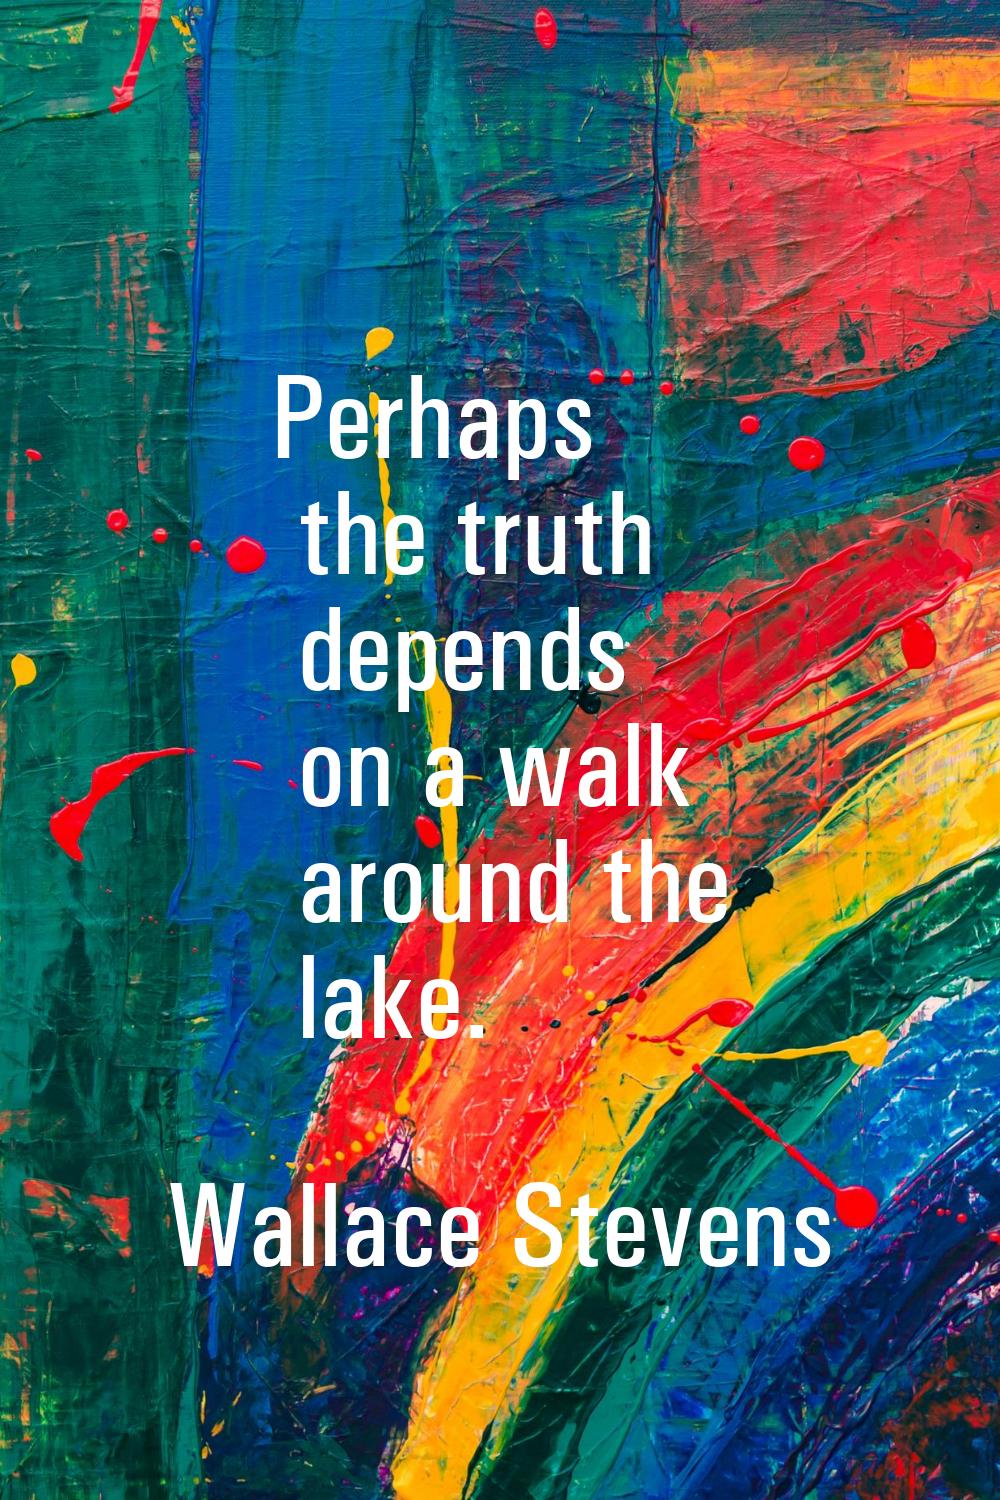 Perhaps the truth depends on a walk around the lake.